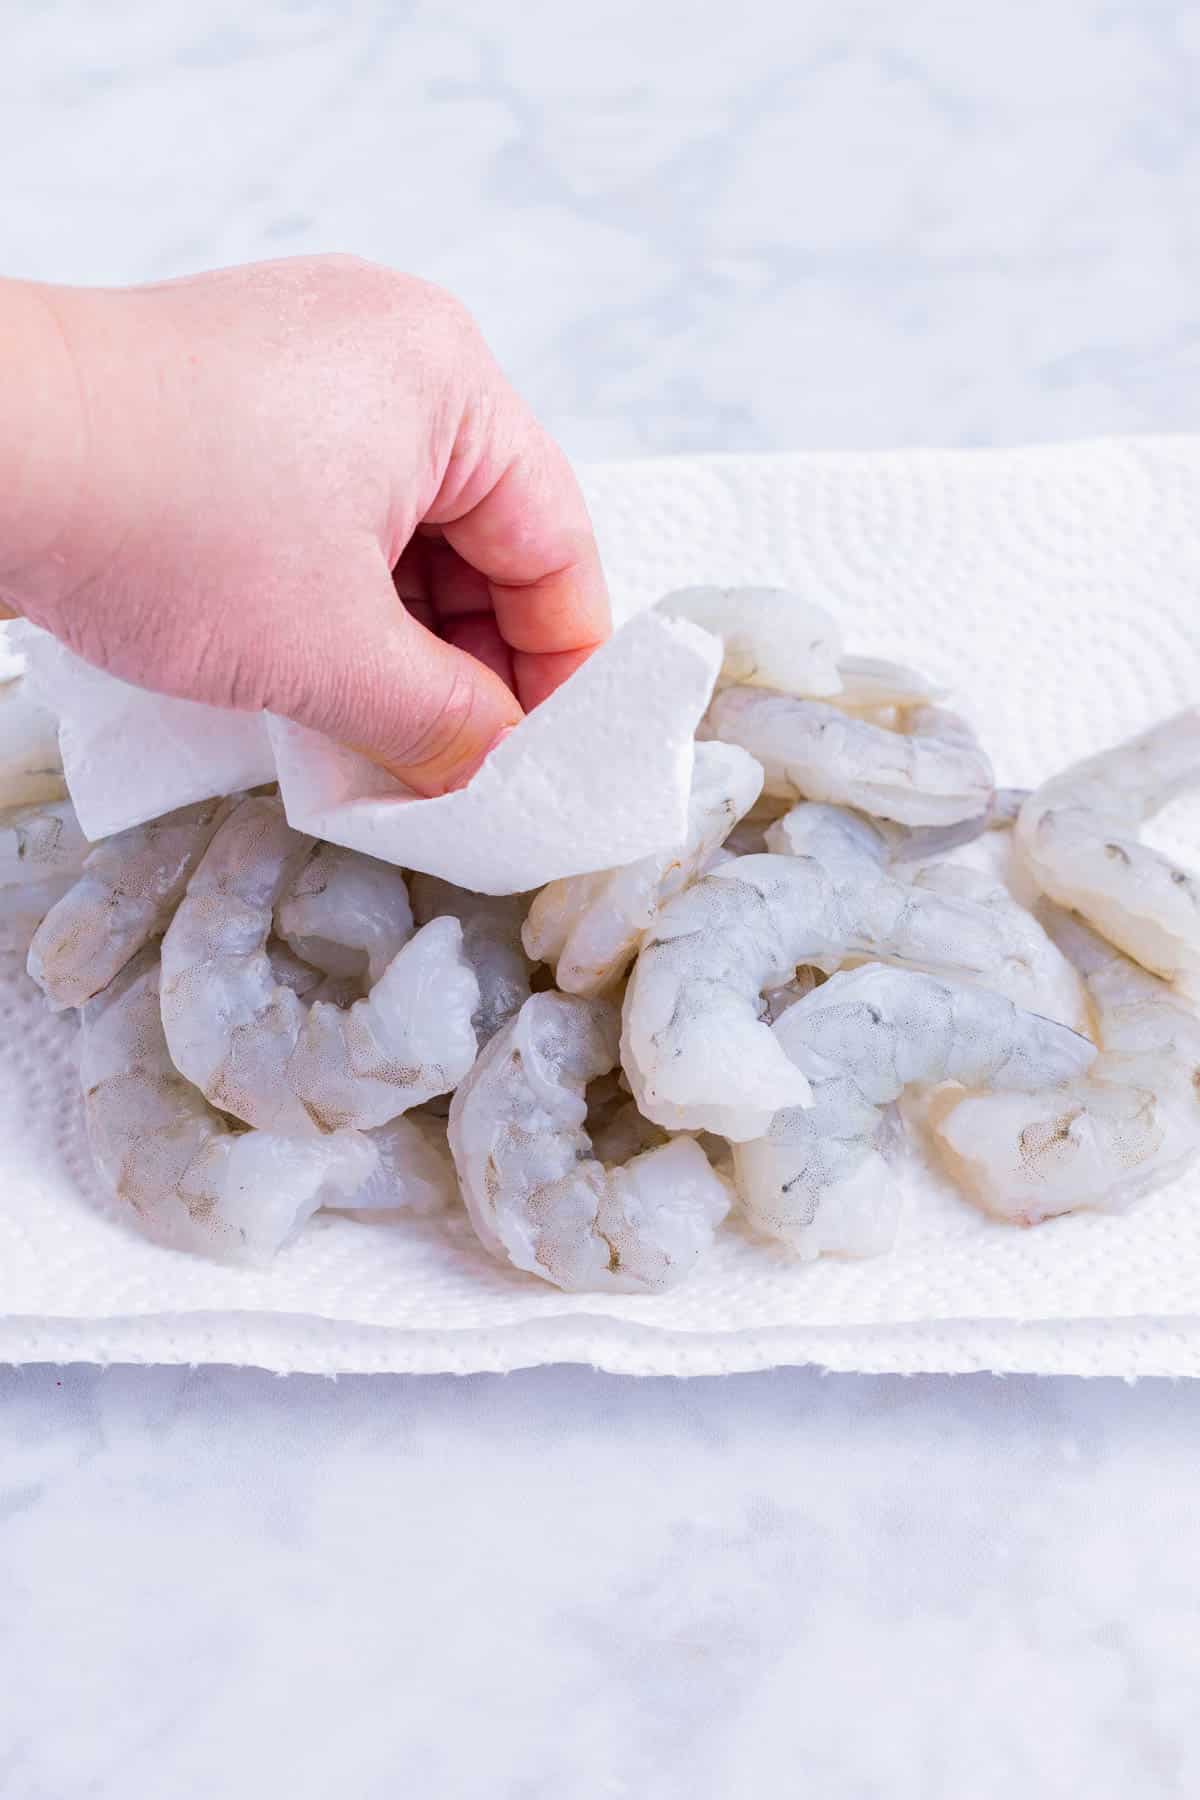 Shrimp is dried off before cooking.